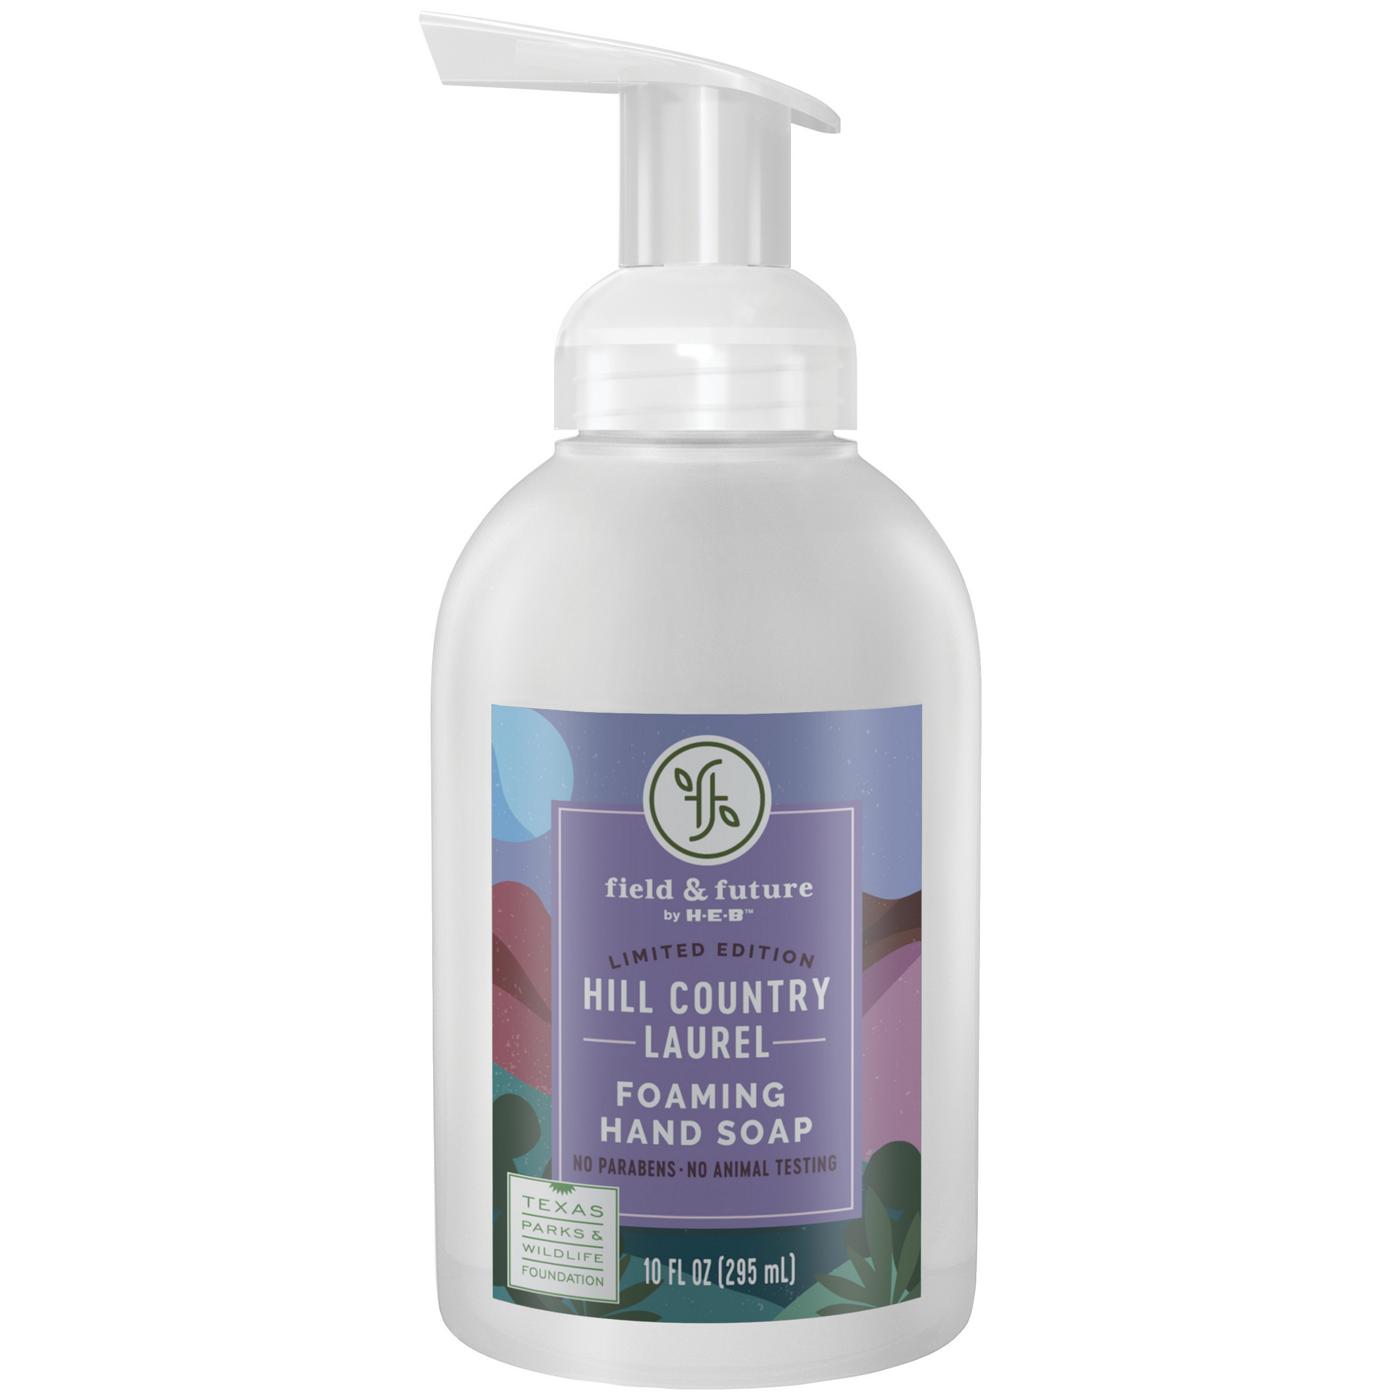 Field & Future by H-E-B Foaming Hand Soap – Hill Country Laurel; image 1 of 3